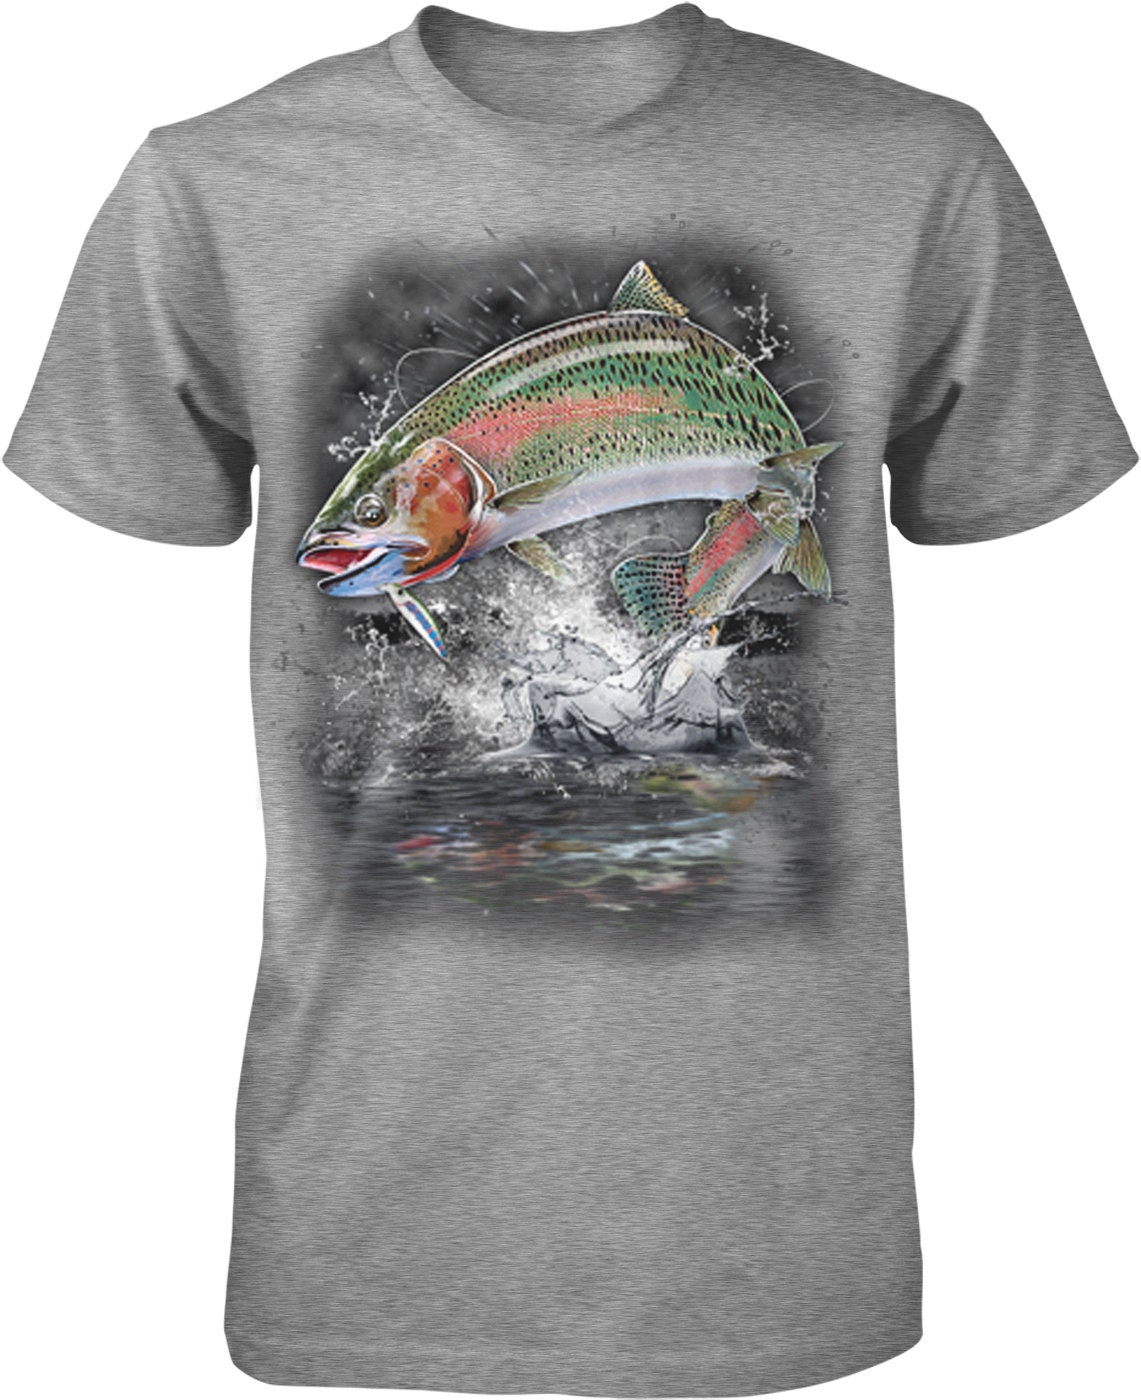 Rainbow Trout, River Trout, Fly Fishing Men's T-shirt, NOFO_00301 -   Canada